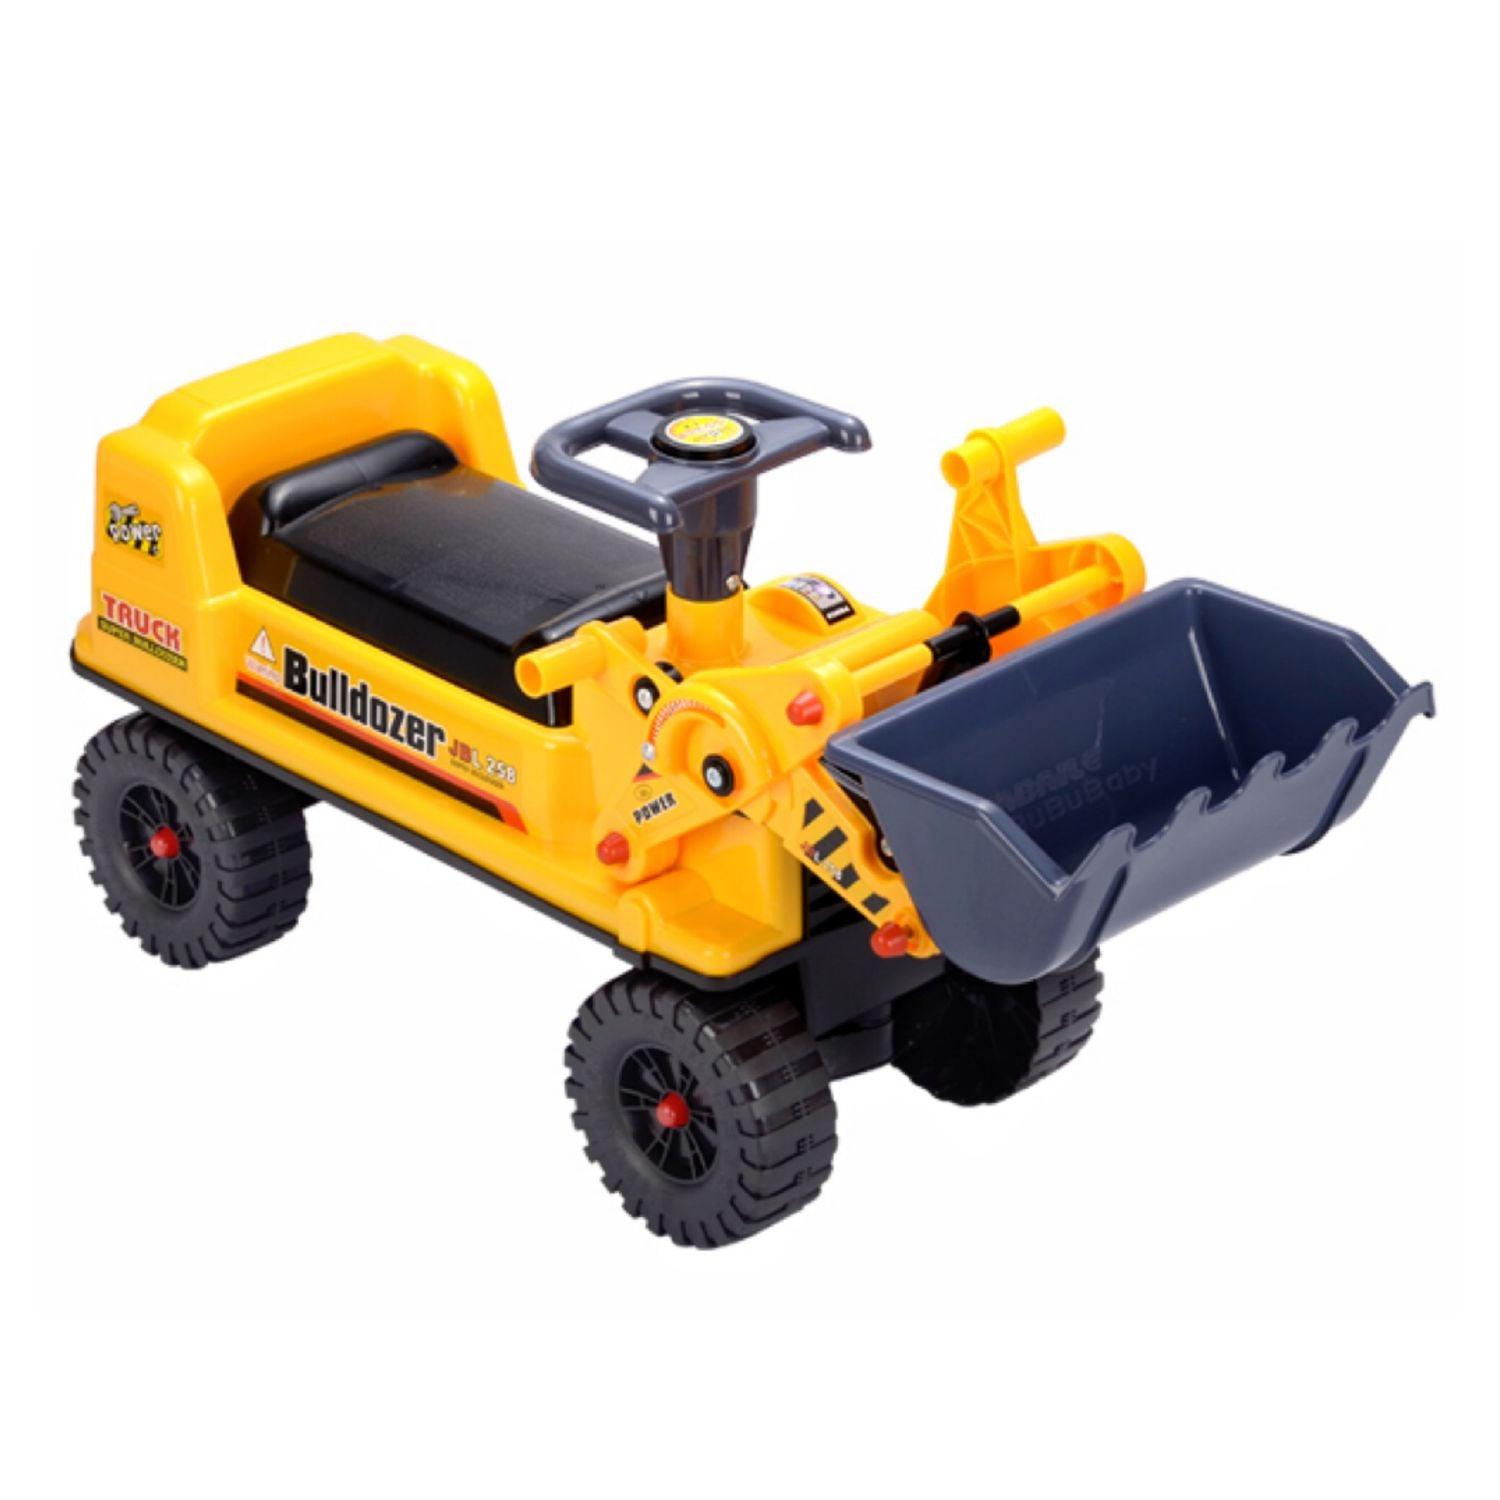 Buy GOMINIMO Kids Ride On Bulldozer Digger Tractor Excavator Toy Car with Helmet GO-KEX-101-JBL | Products On Sale Australia